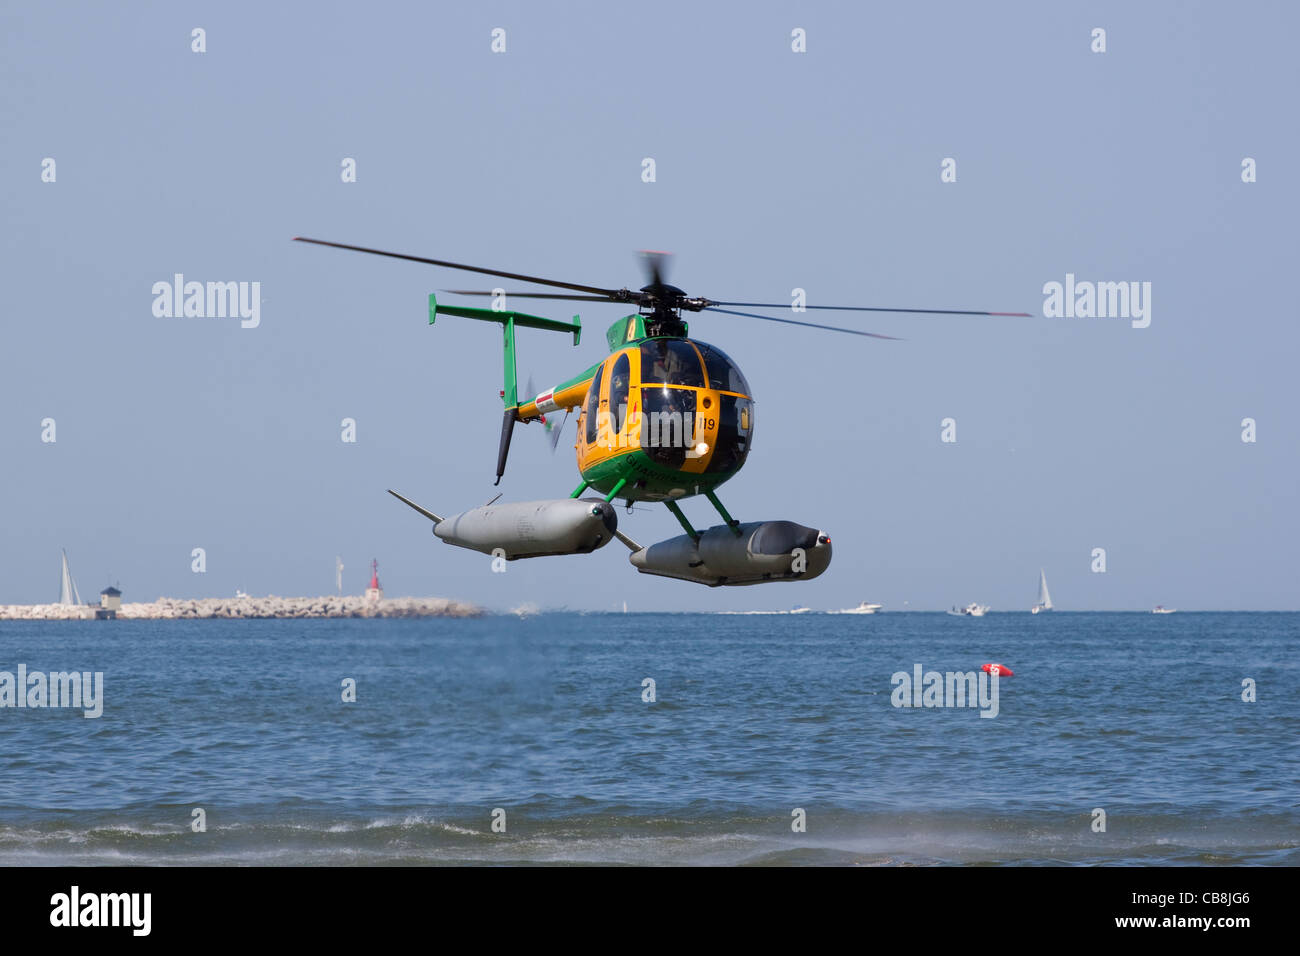 The MD Helicopters NH-500 during an airshow Stock Photo